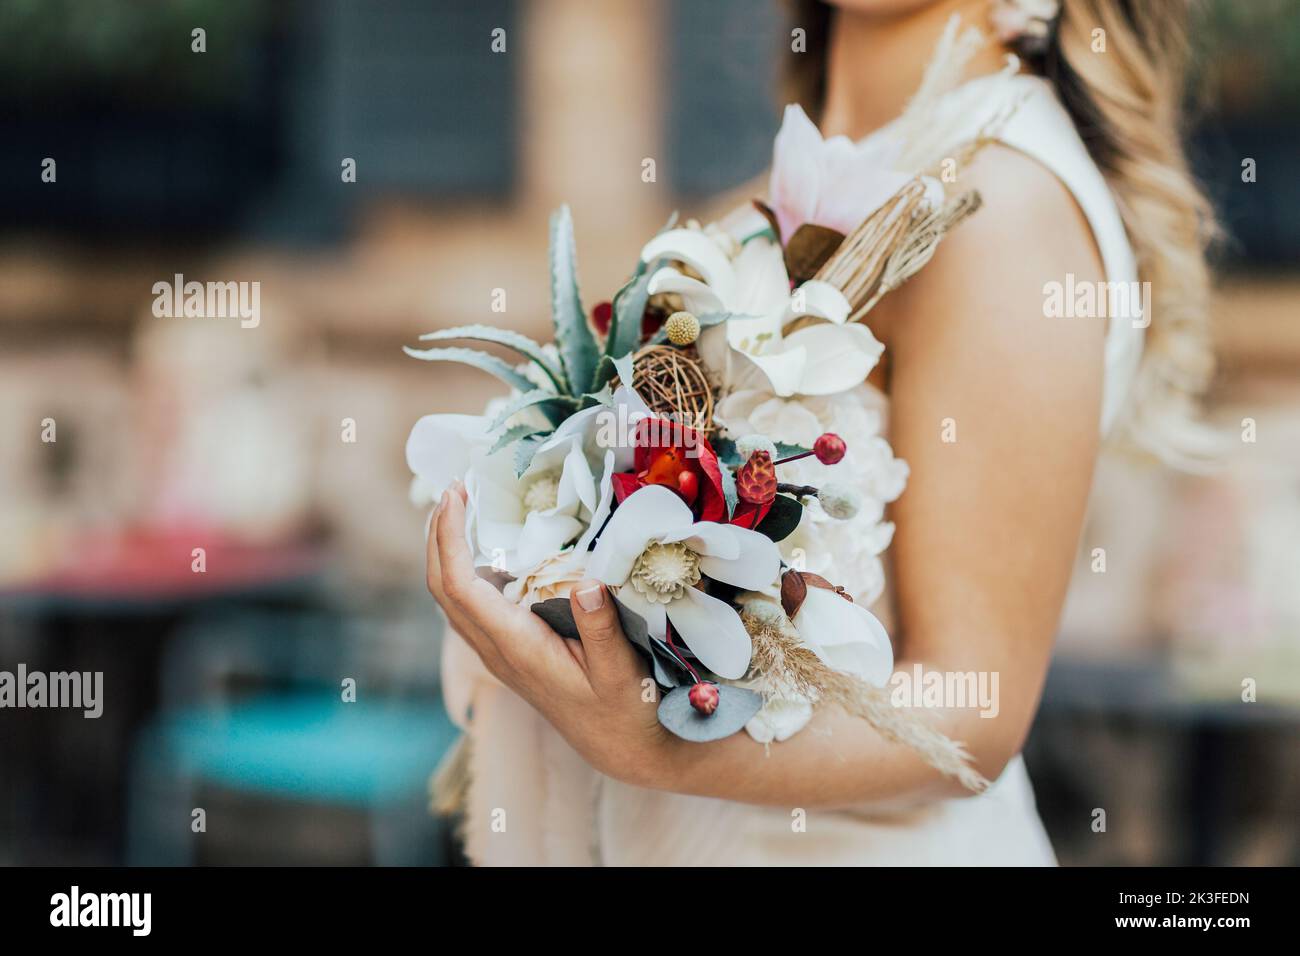 The bride and the flowers in her hand. Stock Photo